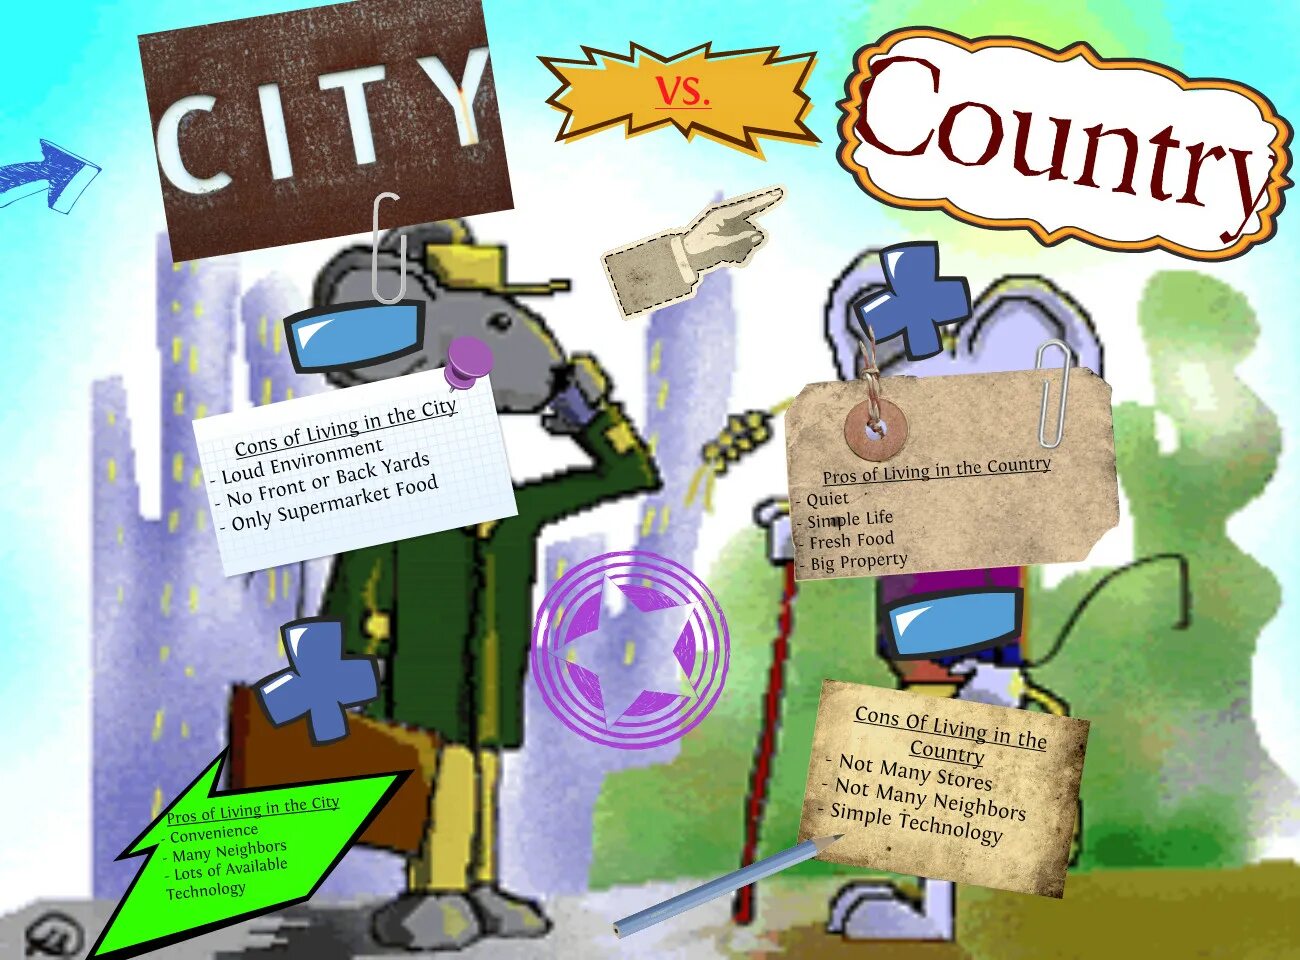 City Life and Country Life. Country vs City Life. City or Country Life. Living in the City or in the Country. Country vs country